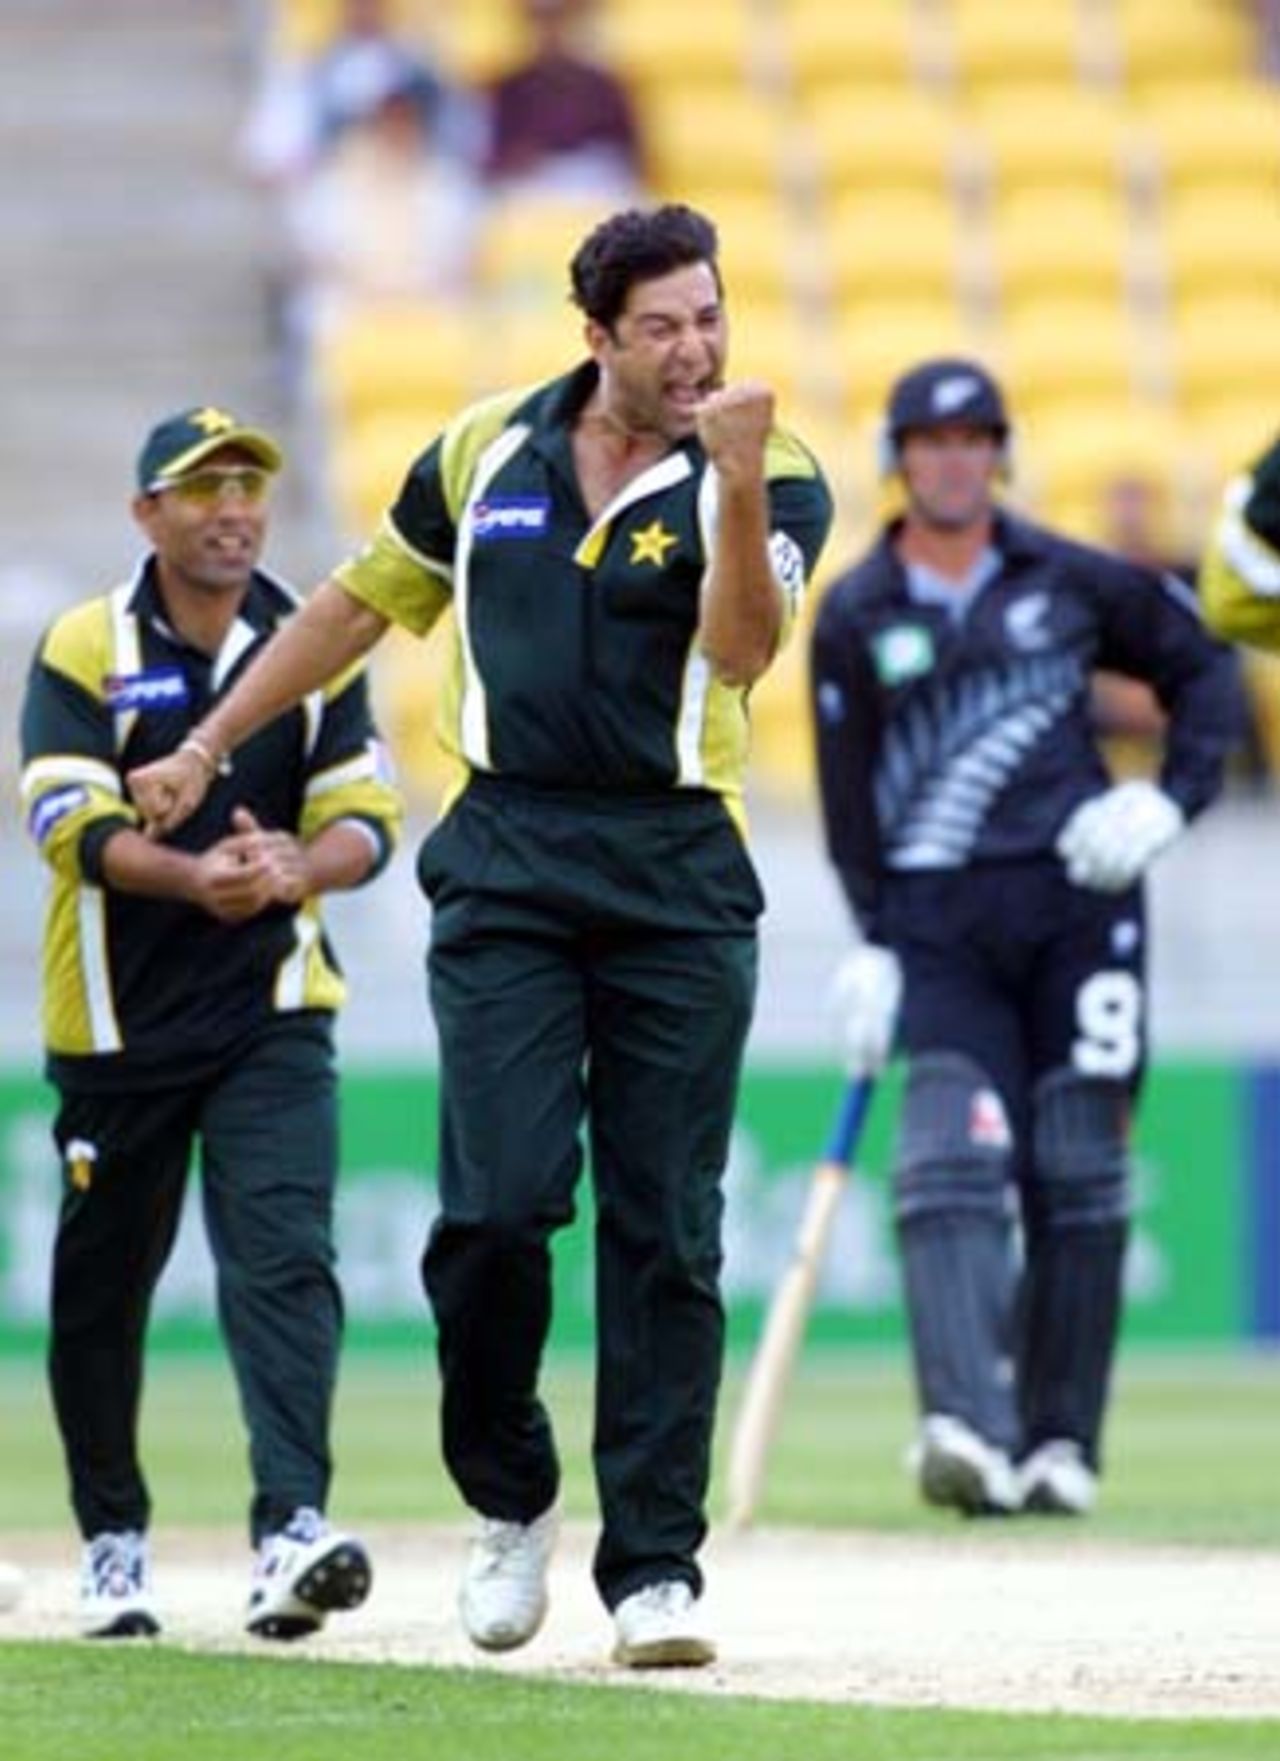 Pakistan opening bowler Wasim Akram punches the air in celebration of dismissing New Zealand opening batsman Stephen Fleming for one, adjudged out leg before wicket by umpire Dave Quested. Team-mate Saeed Anwar approaches to congratulate him, while opening batsman Nathan Astle leans on his bat watching in the background. 3rd One-Day International: New Zealand v Pakistan at WestpacTrust Stadium, Wellington, 22 February 2001.